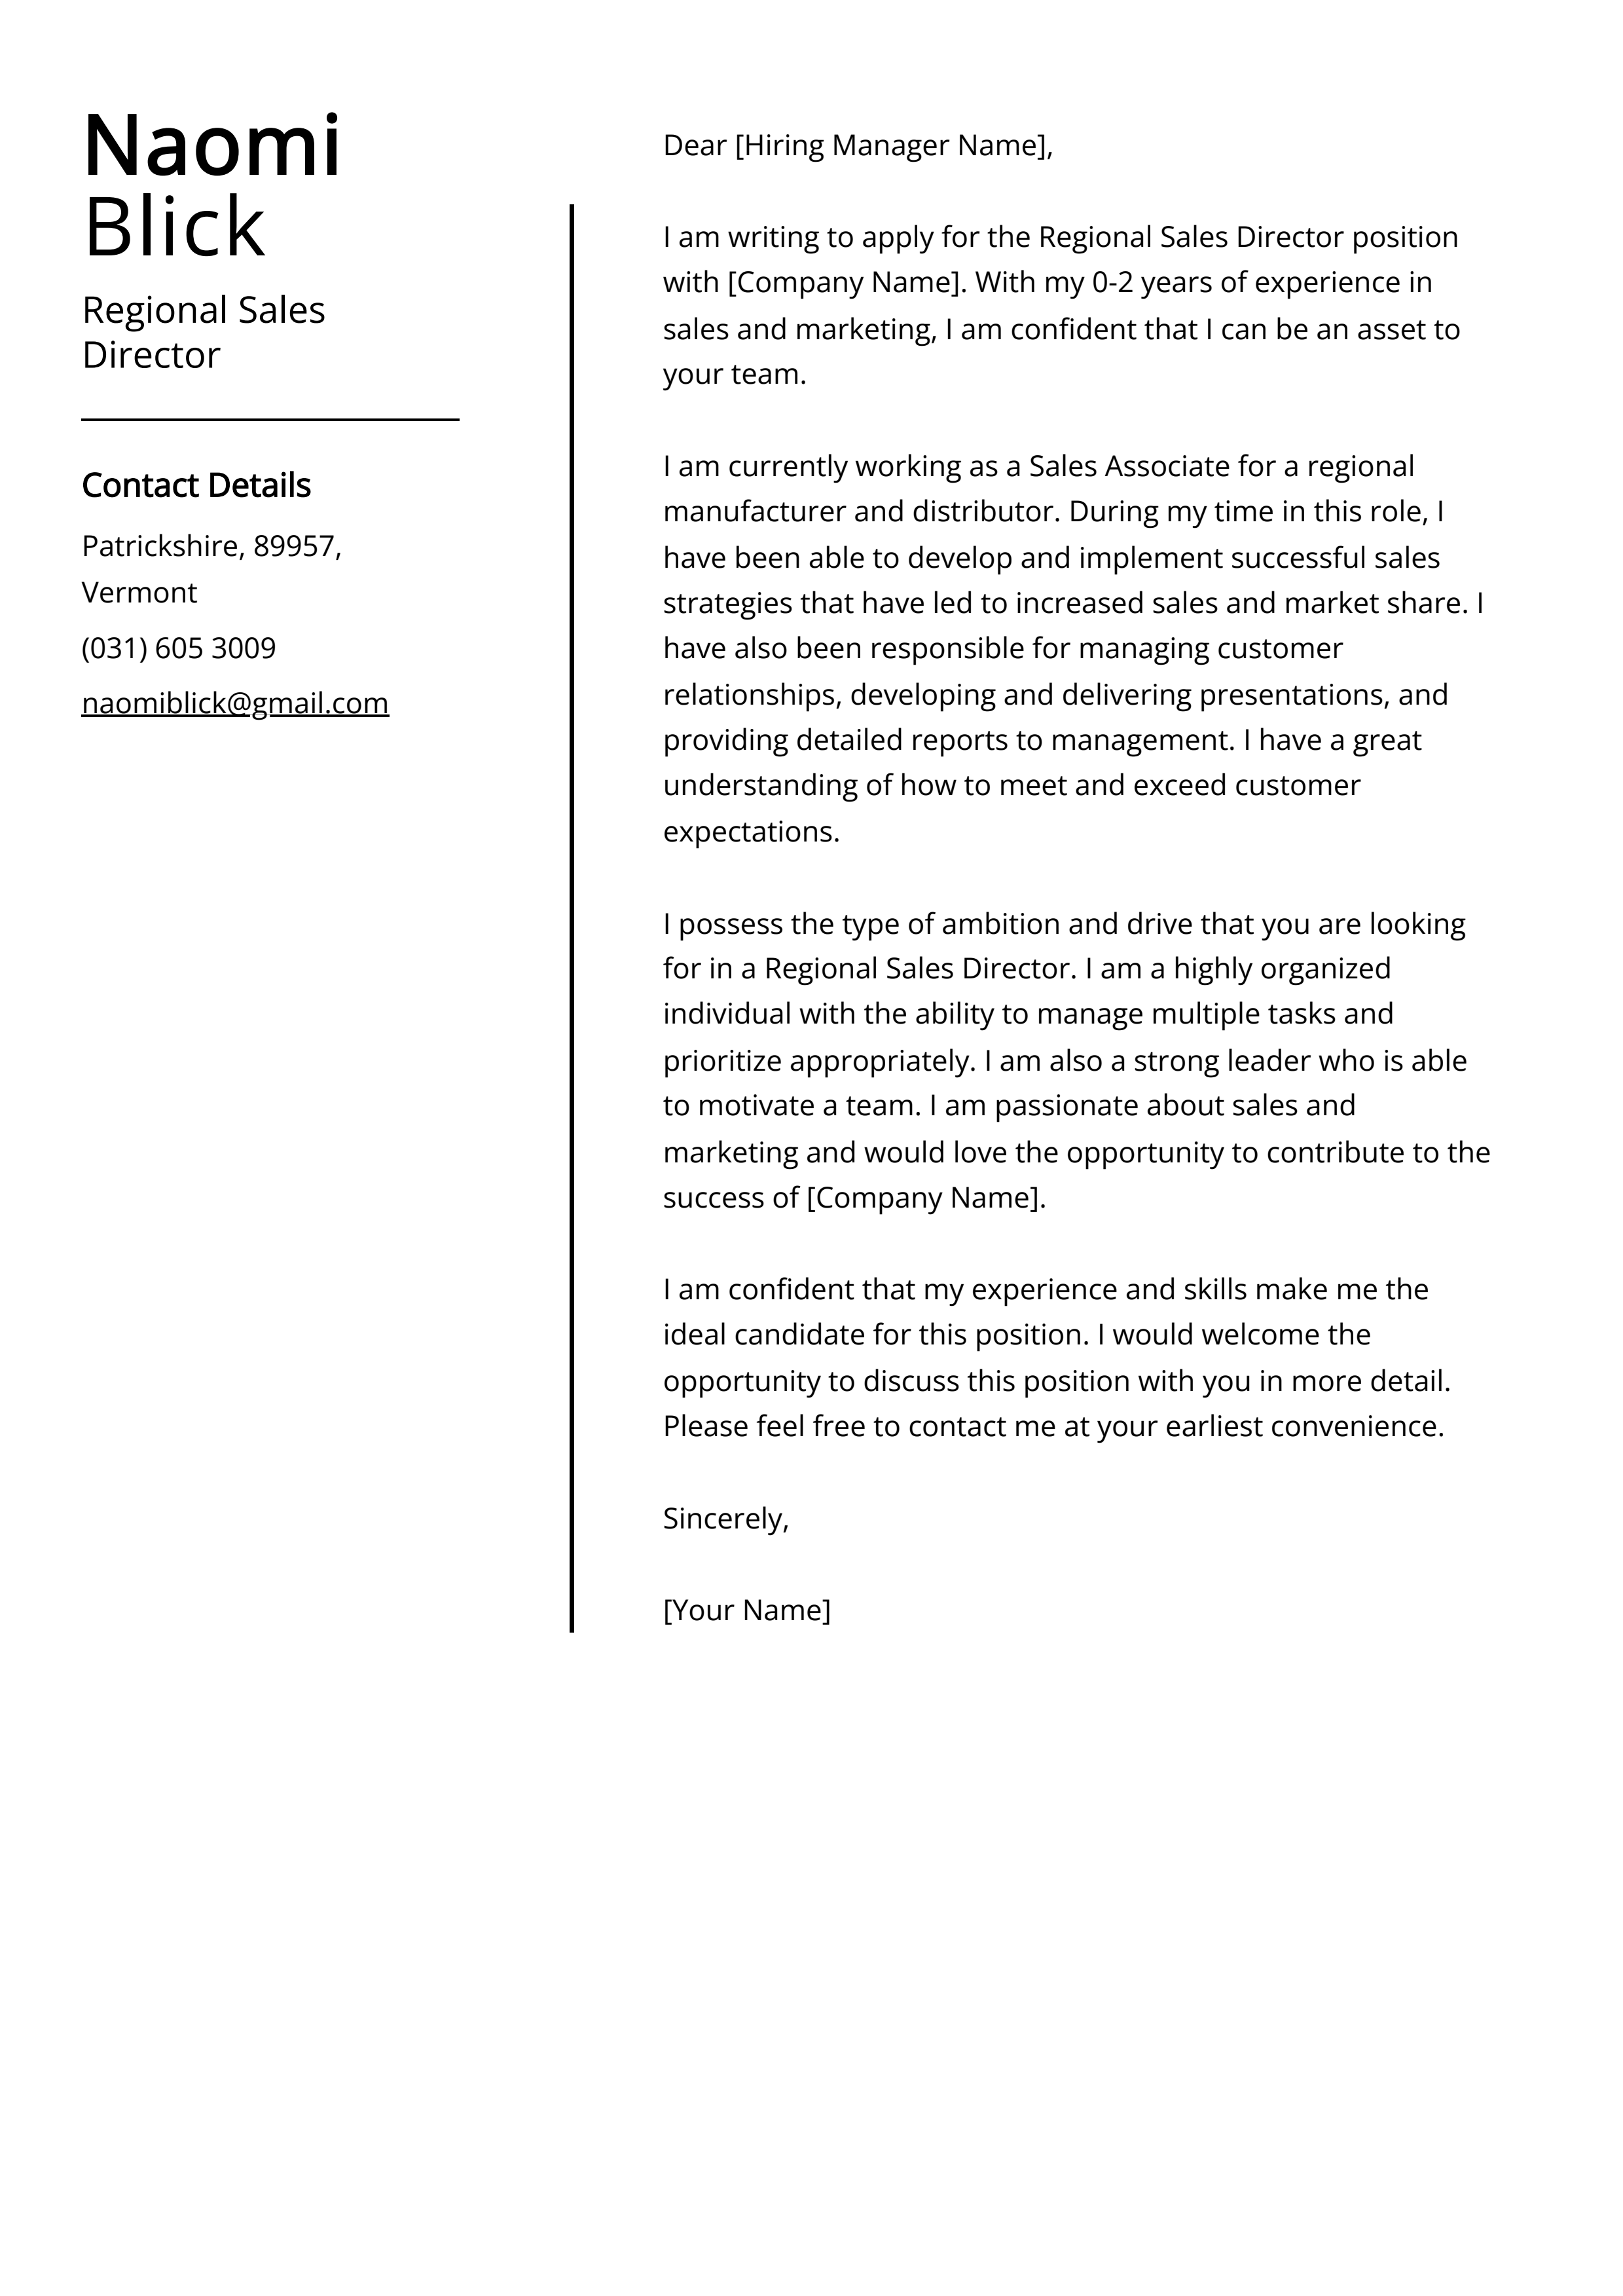 Regional Sales Director Cover Letter Example